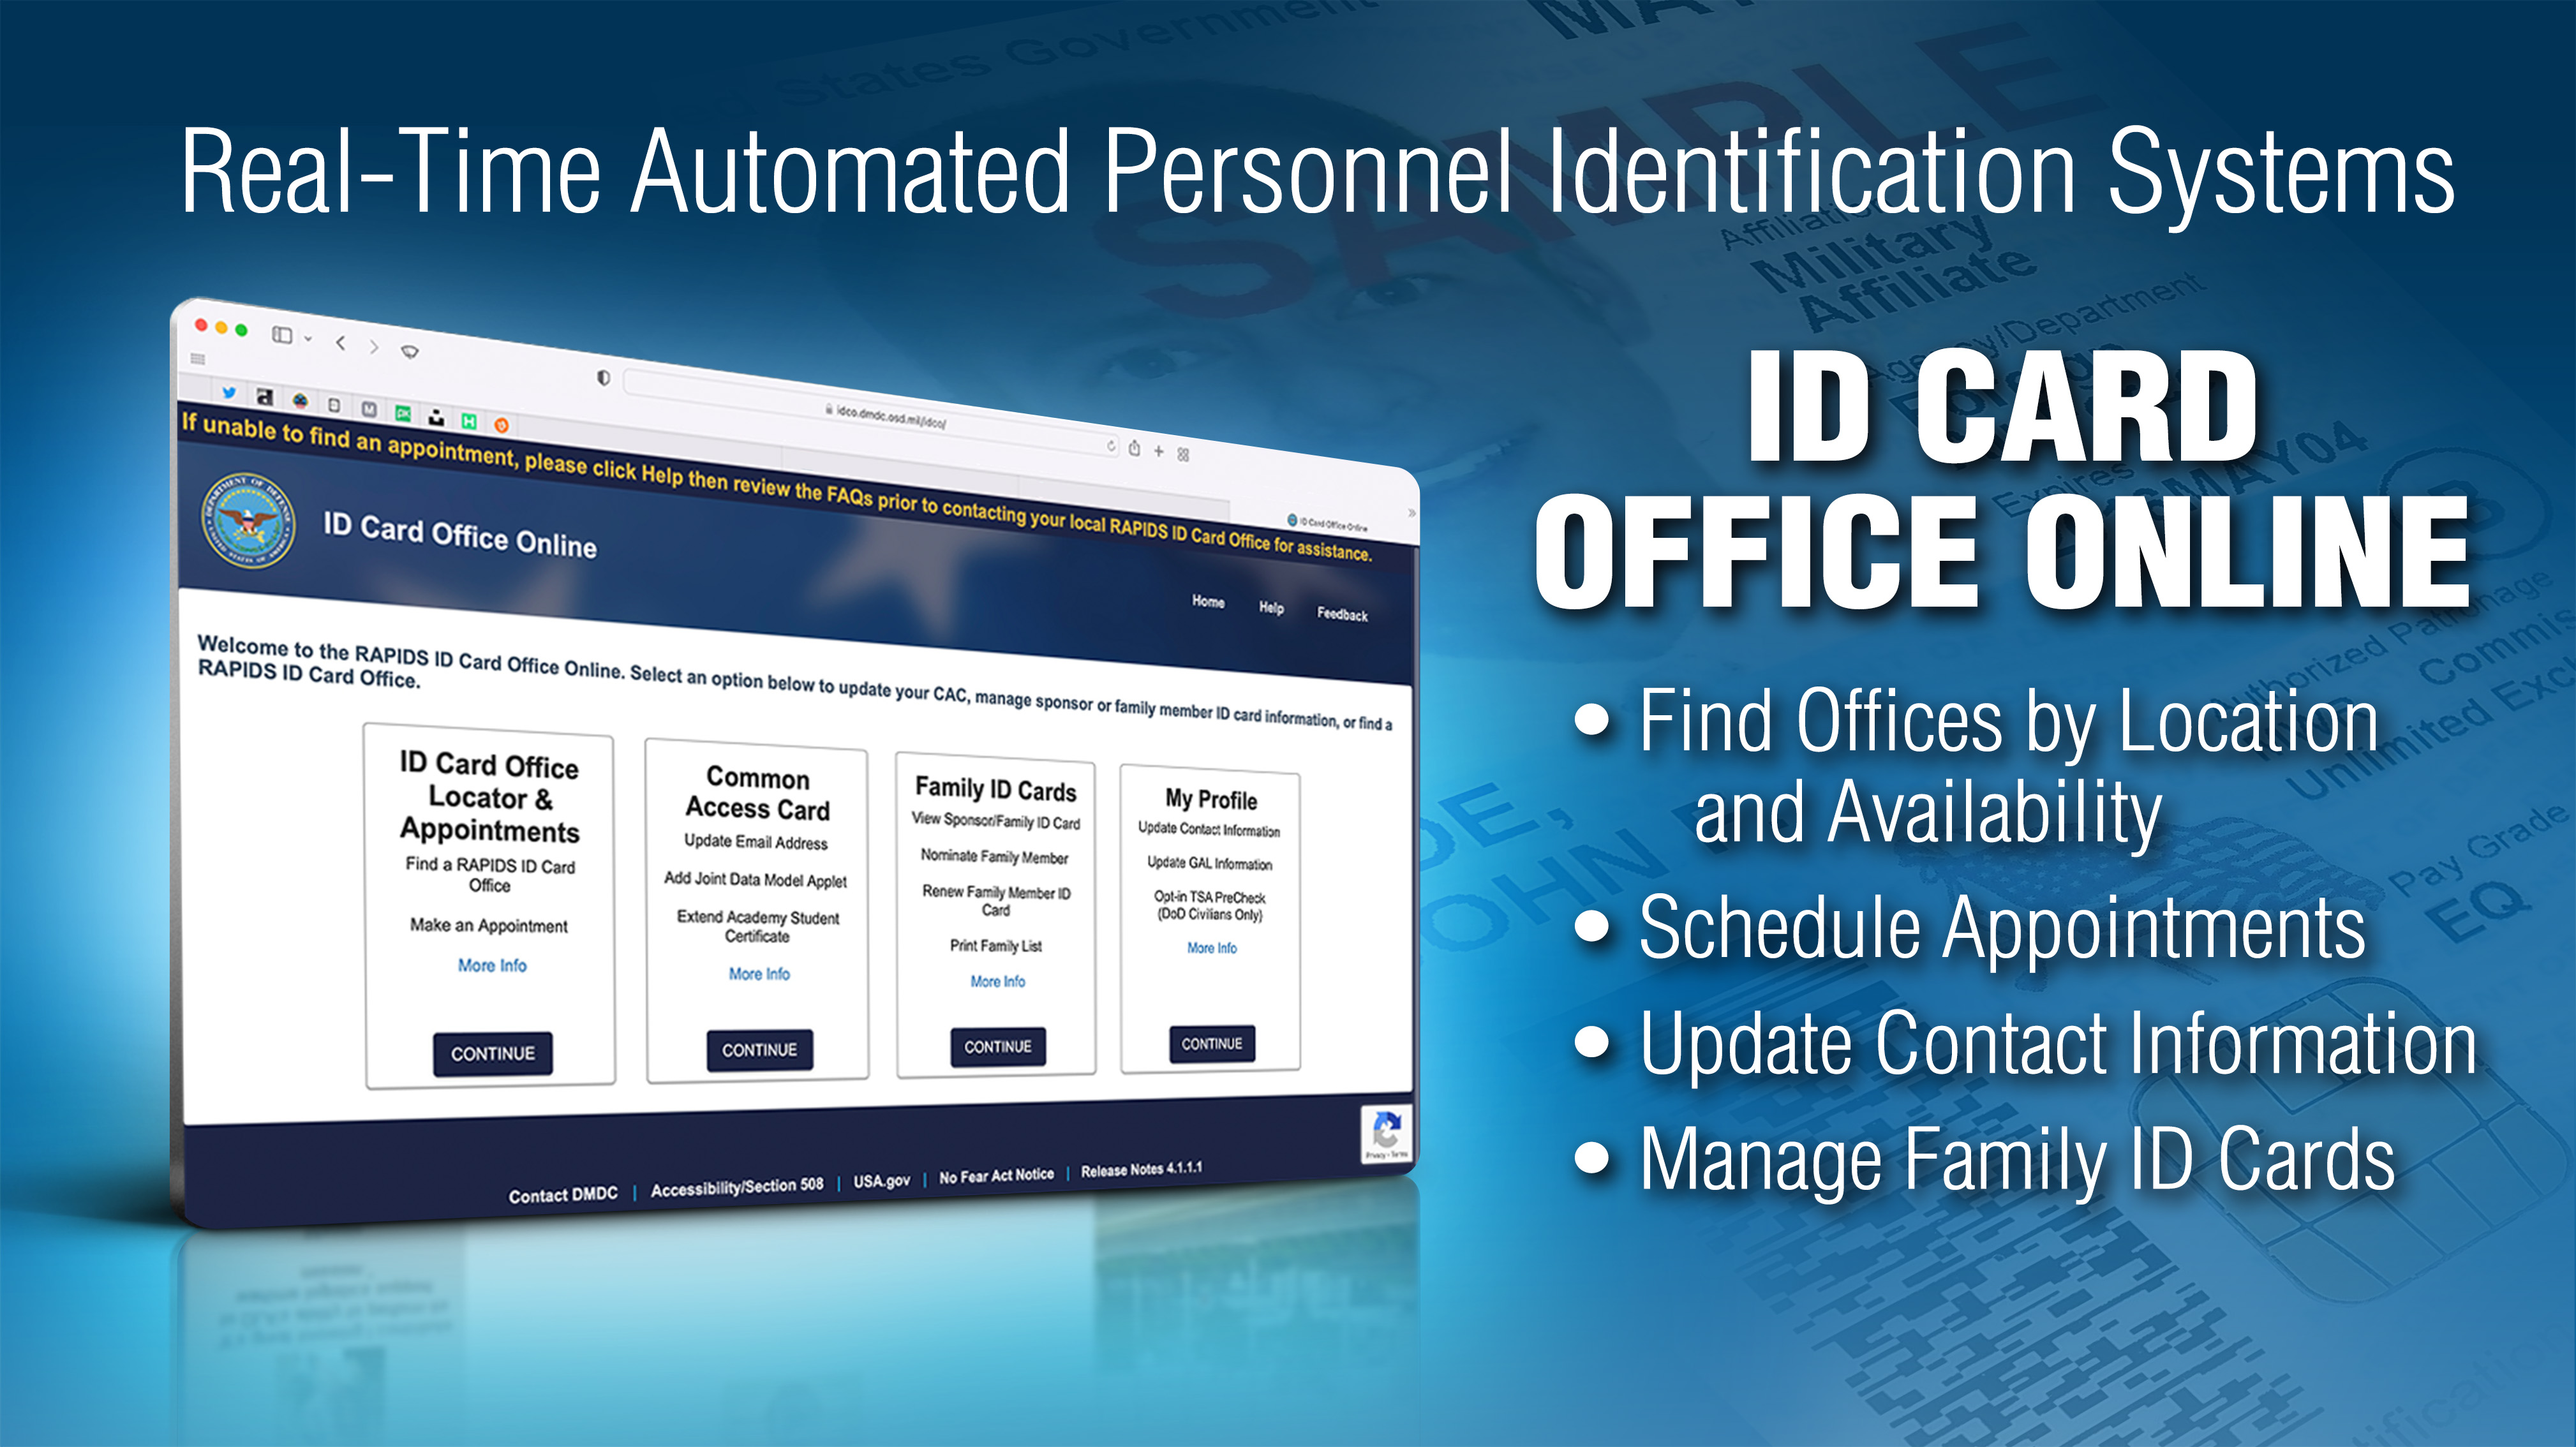 Website lets DLA employees schedule Common Access Card, ID